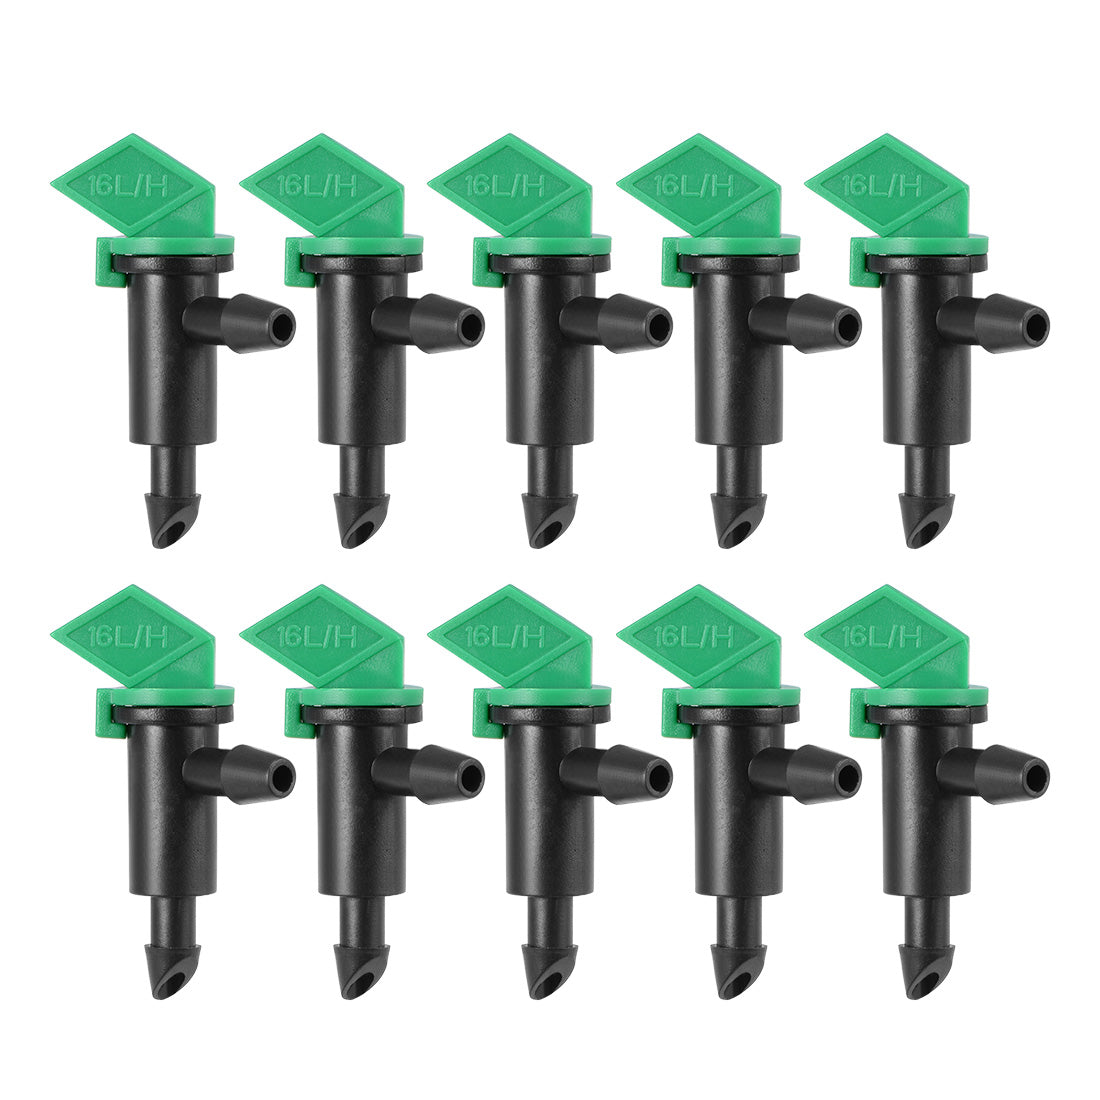 uxcell Uxcell Flag Dripper 4 GPH 16L/H Emitter Sprinkler for Garden Lawn Drip Irrigation Connect 4/7mm Hose, Plastic 30pcs